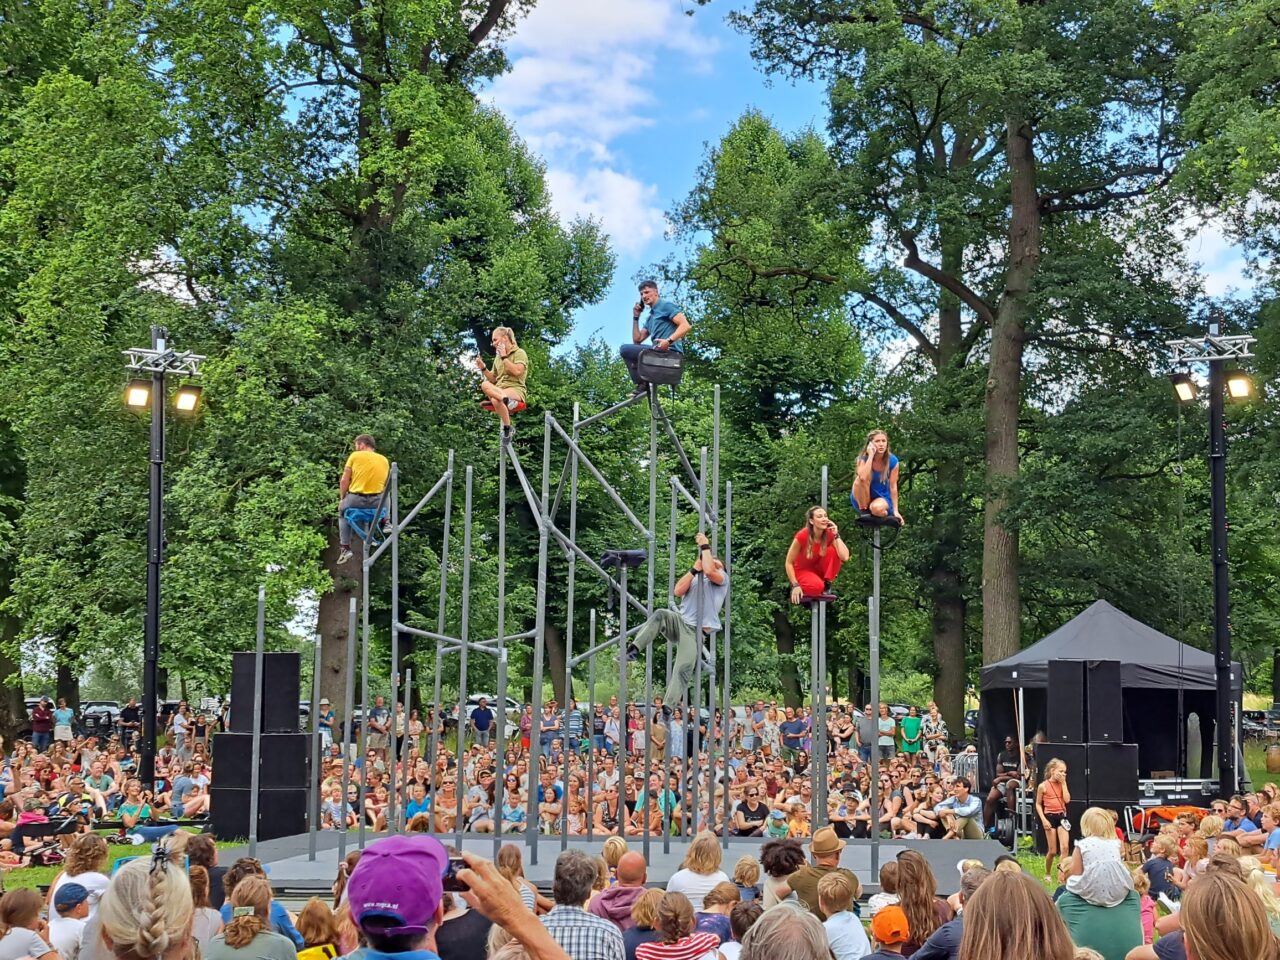 A group of people sit on top of tall poles while a large crowd watches below